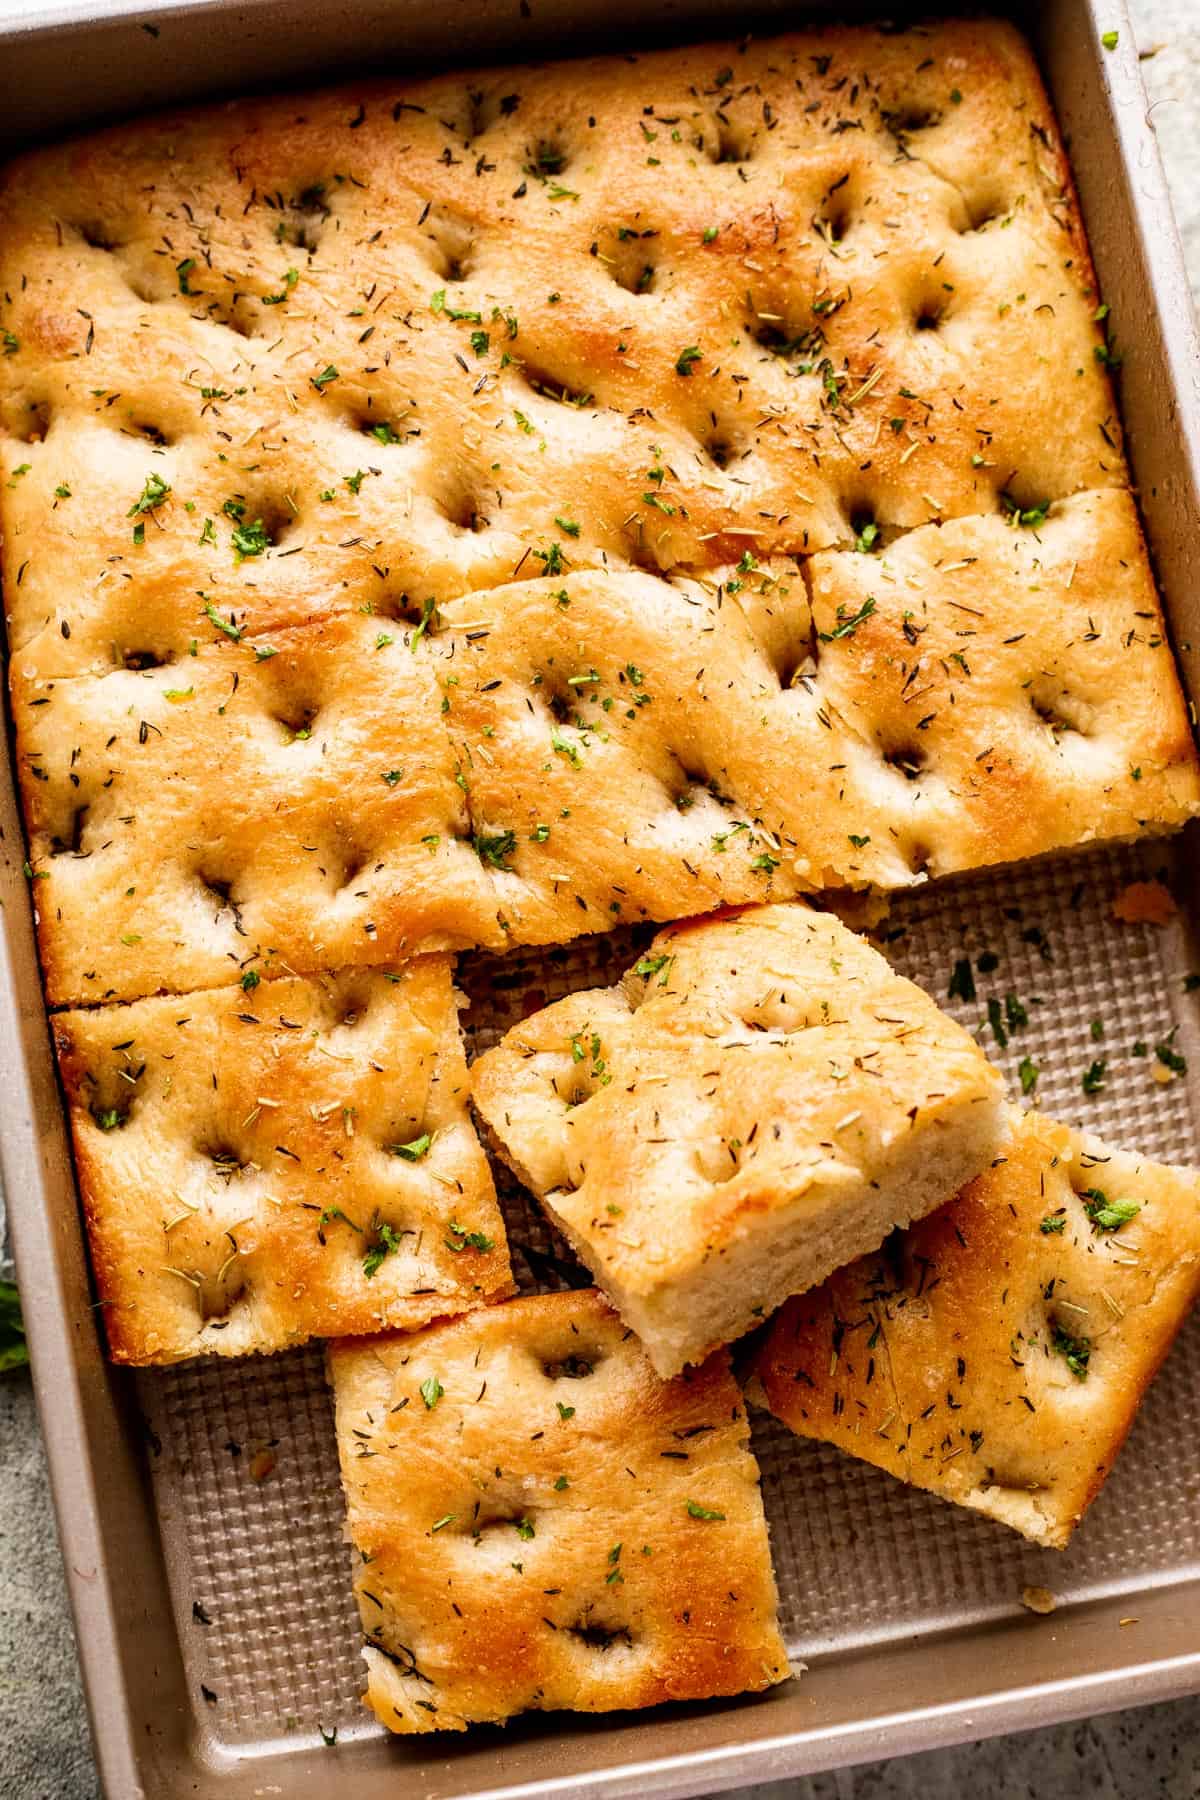 A large pan-sized loaf of focaccia, with four squares of bread cut away.